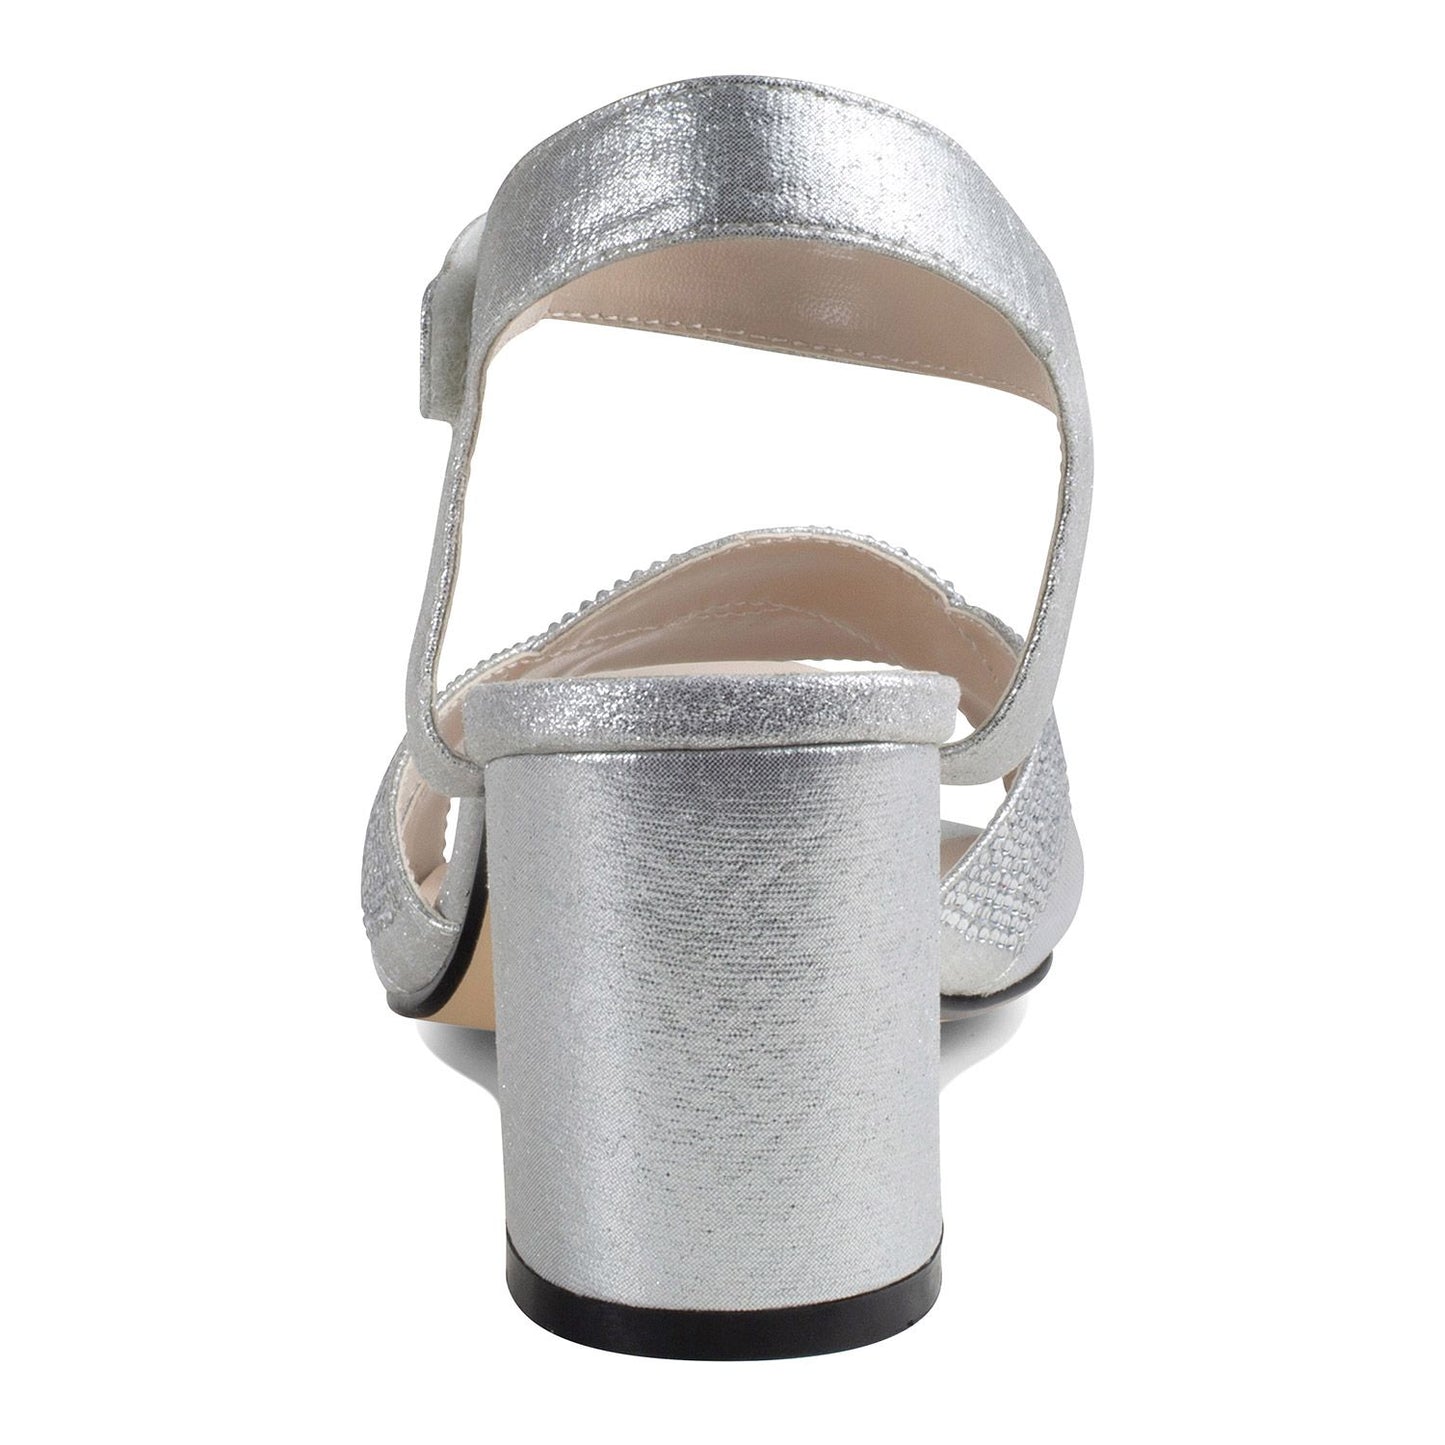 Back view of 2.25 inch silver shimmer shoe with block heel